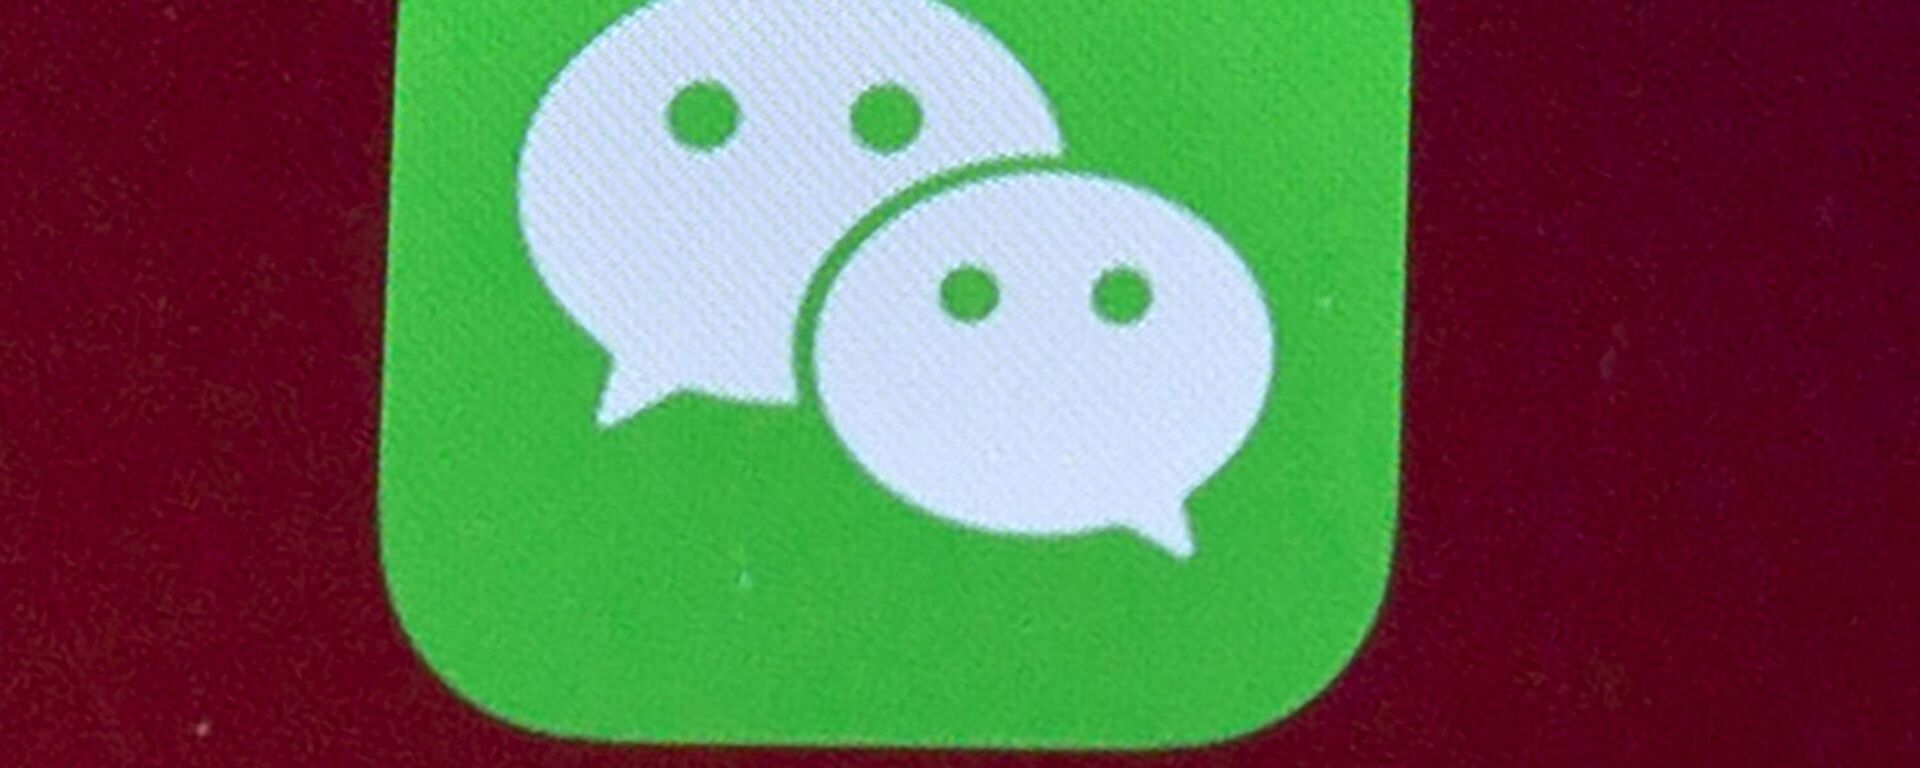 Icons for the smartphone apps WeChat are seen on a smartphone screen in Beijing, on Aug. 7, 2020.  The Justice Department is asking a judge to allow WeChat to be banned from app stores in the U.S., pending an appeal. In a Friday, Sept. 25, 2020 filing, the Justice Department requested U.S. Magistrate Judge Laurel Beeler in California put on hold a preliminary injunction issued Saturday.  - Sputnik International, 1920, 09.03.2021